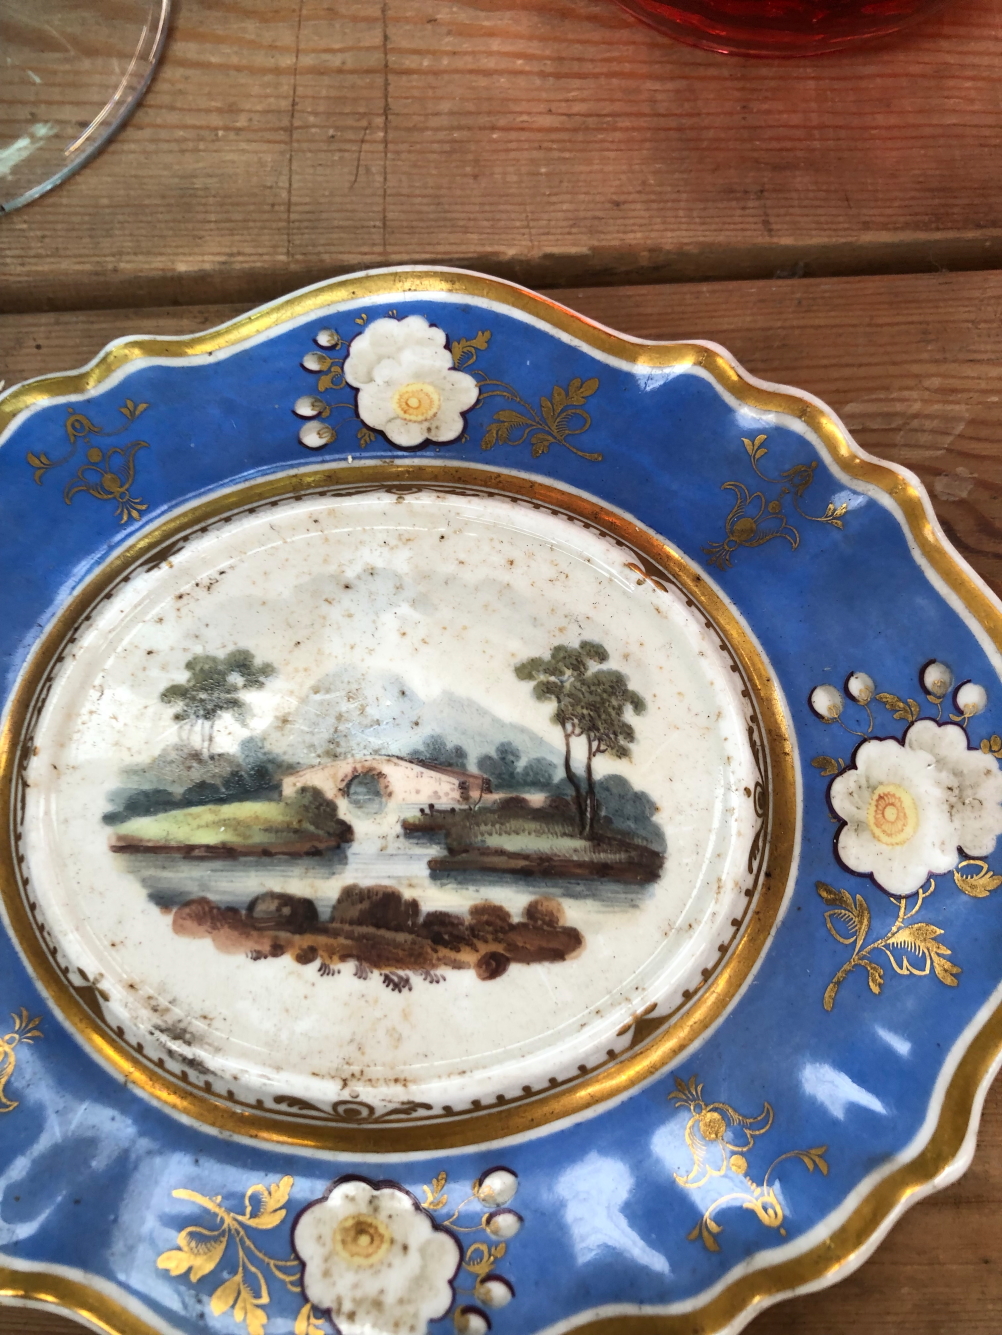 A 19th C. ENGLISH PORCELAIN DESSERT SERVICE PAINTED WITH LANDSCAPES WITHIN GILT BLUE BANDS - Image 20 of 27